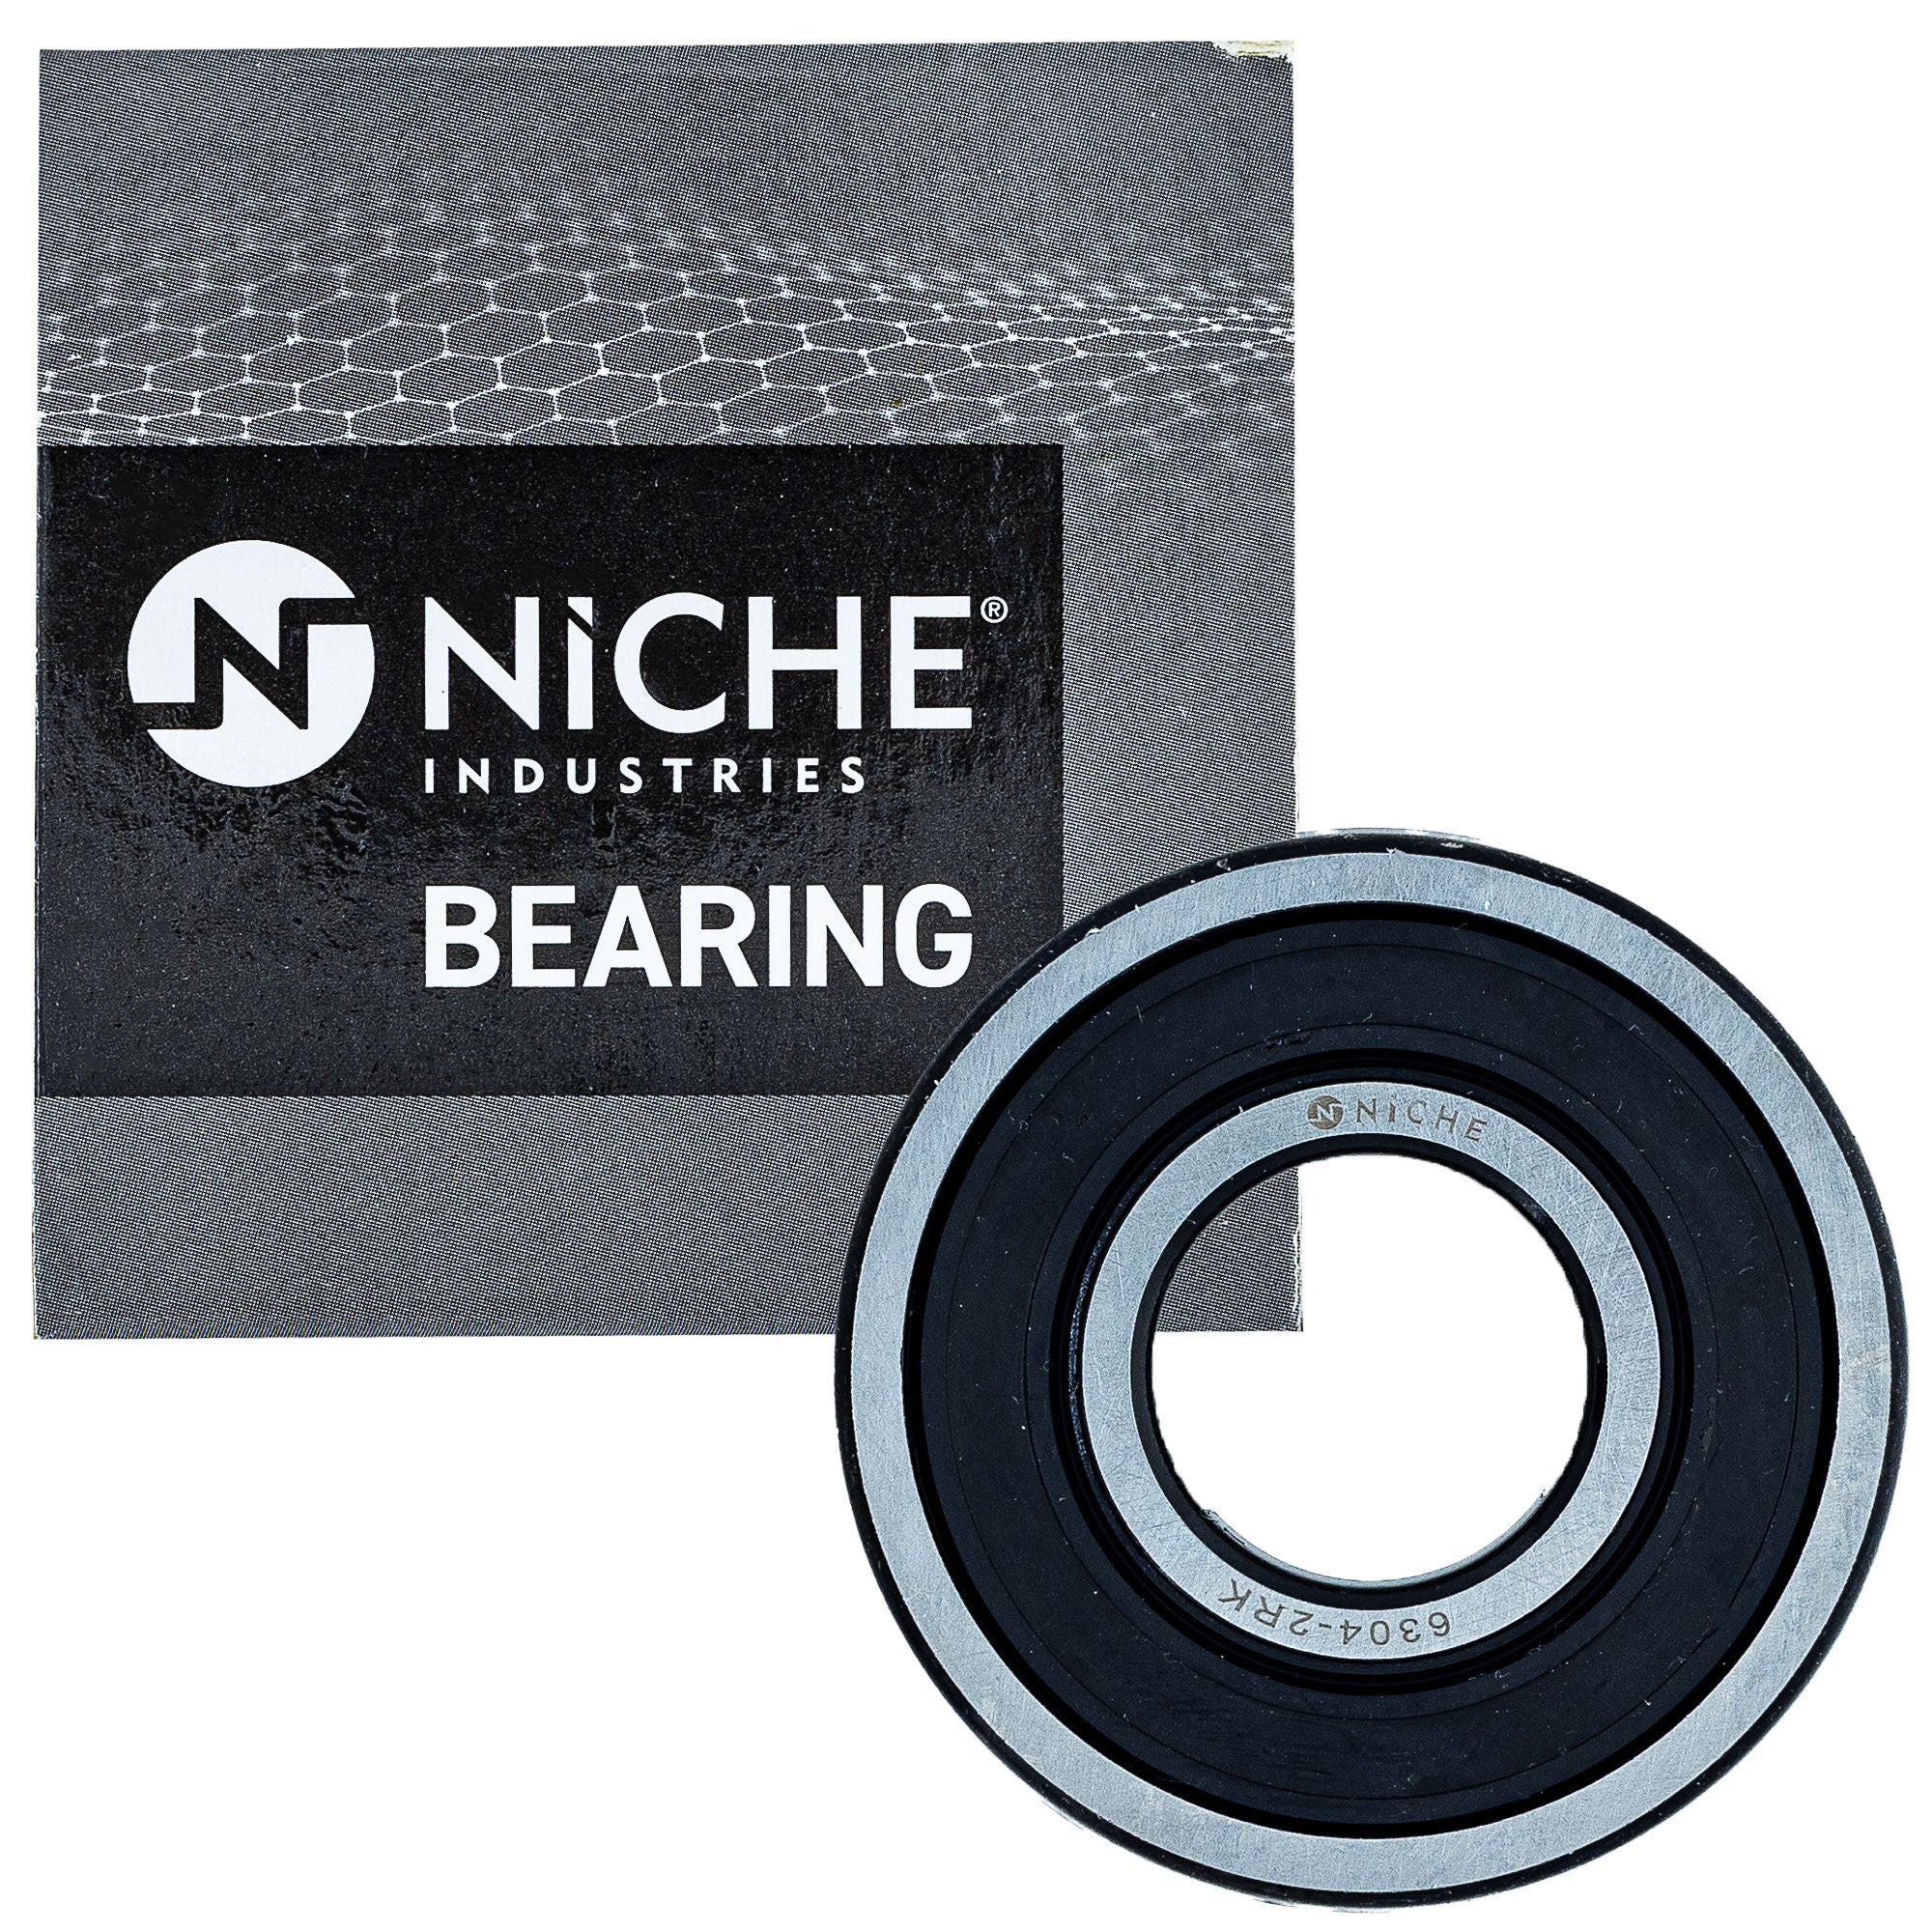 NICHE MK1009177 Wheel Bearing Seal Kit for zOTHER Valkyrie Pacific